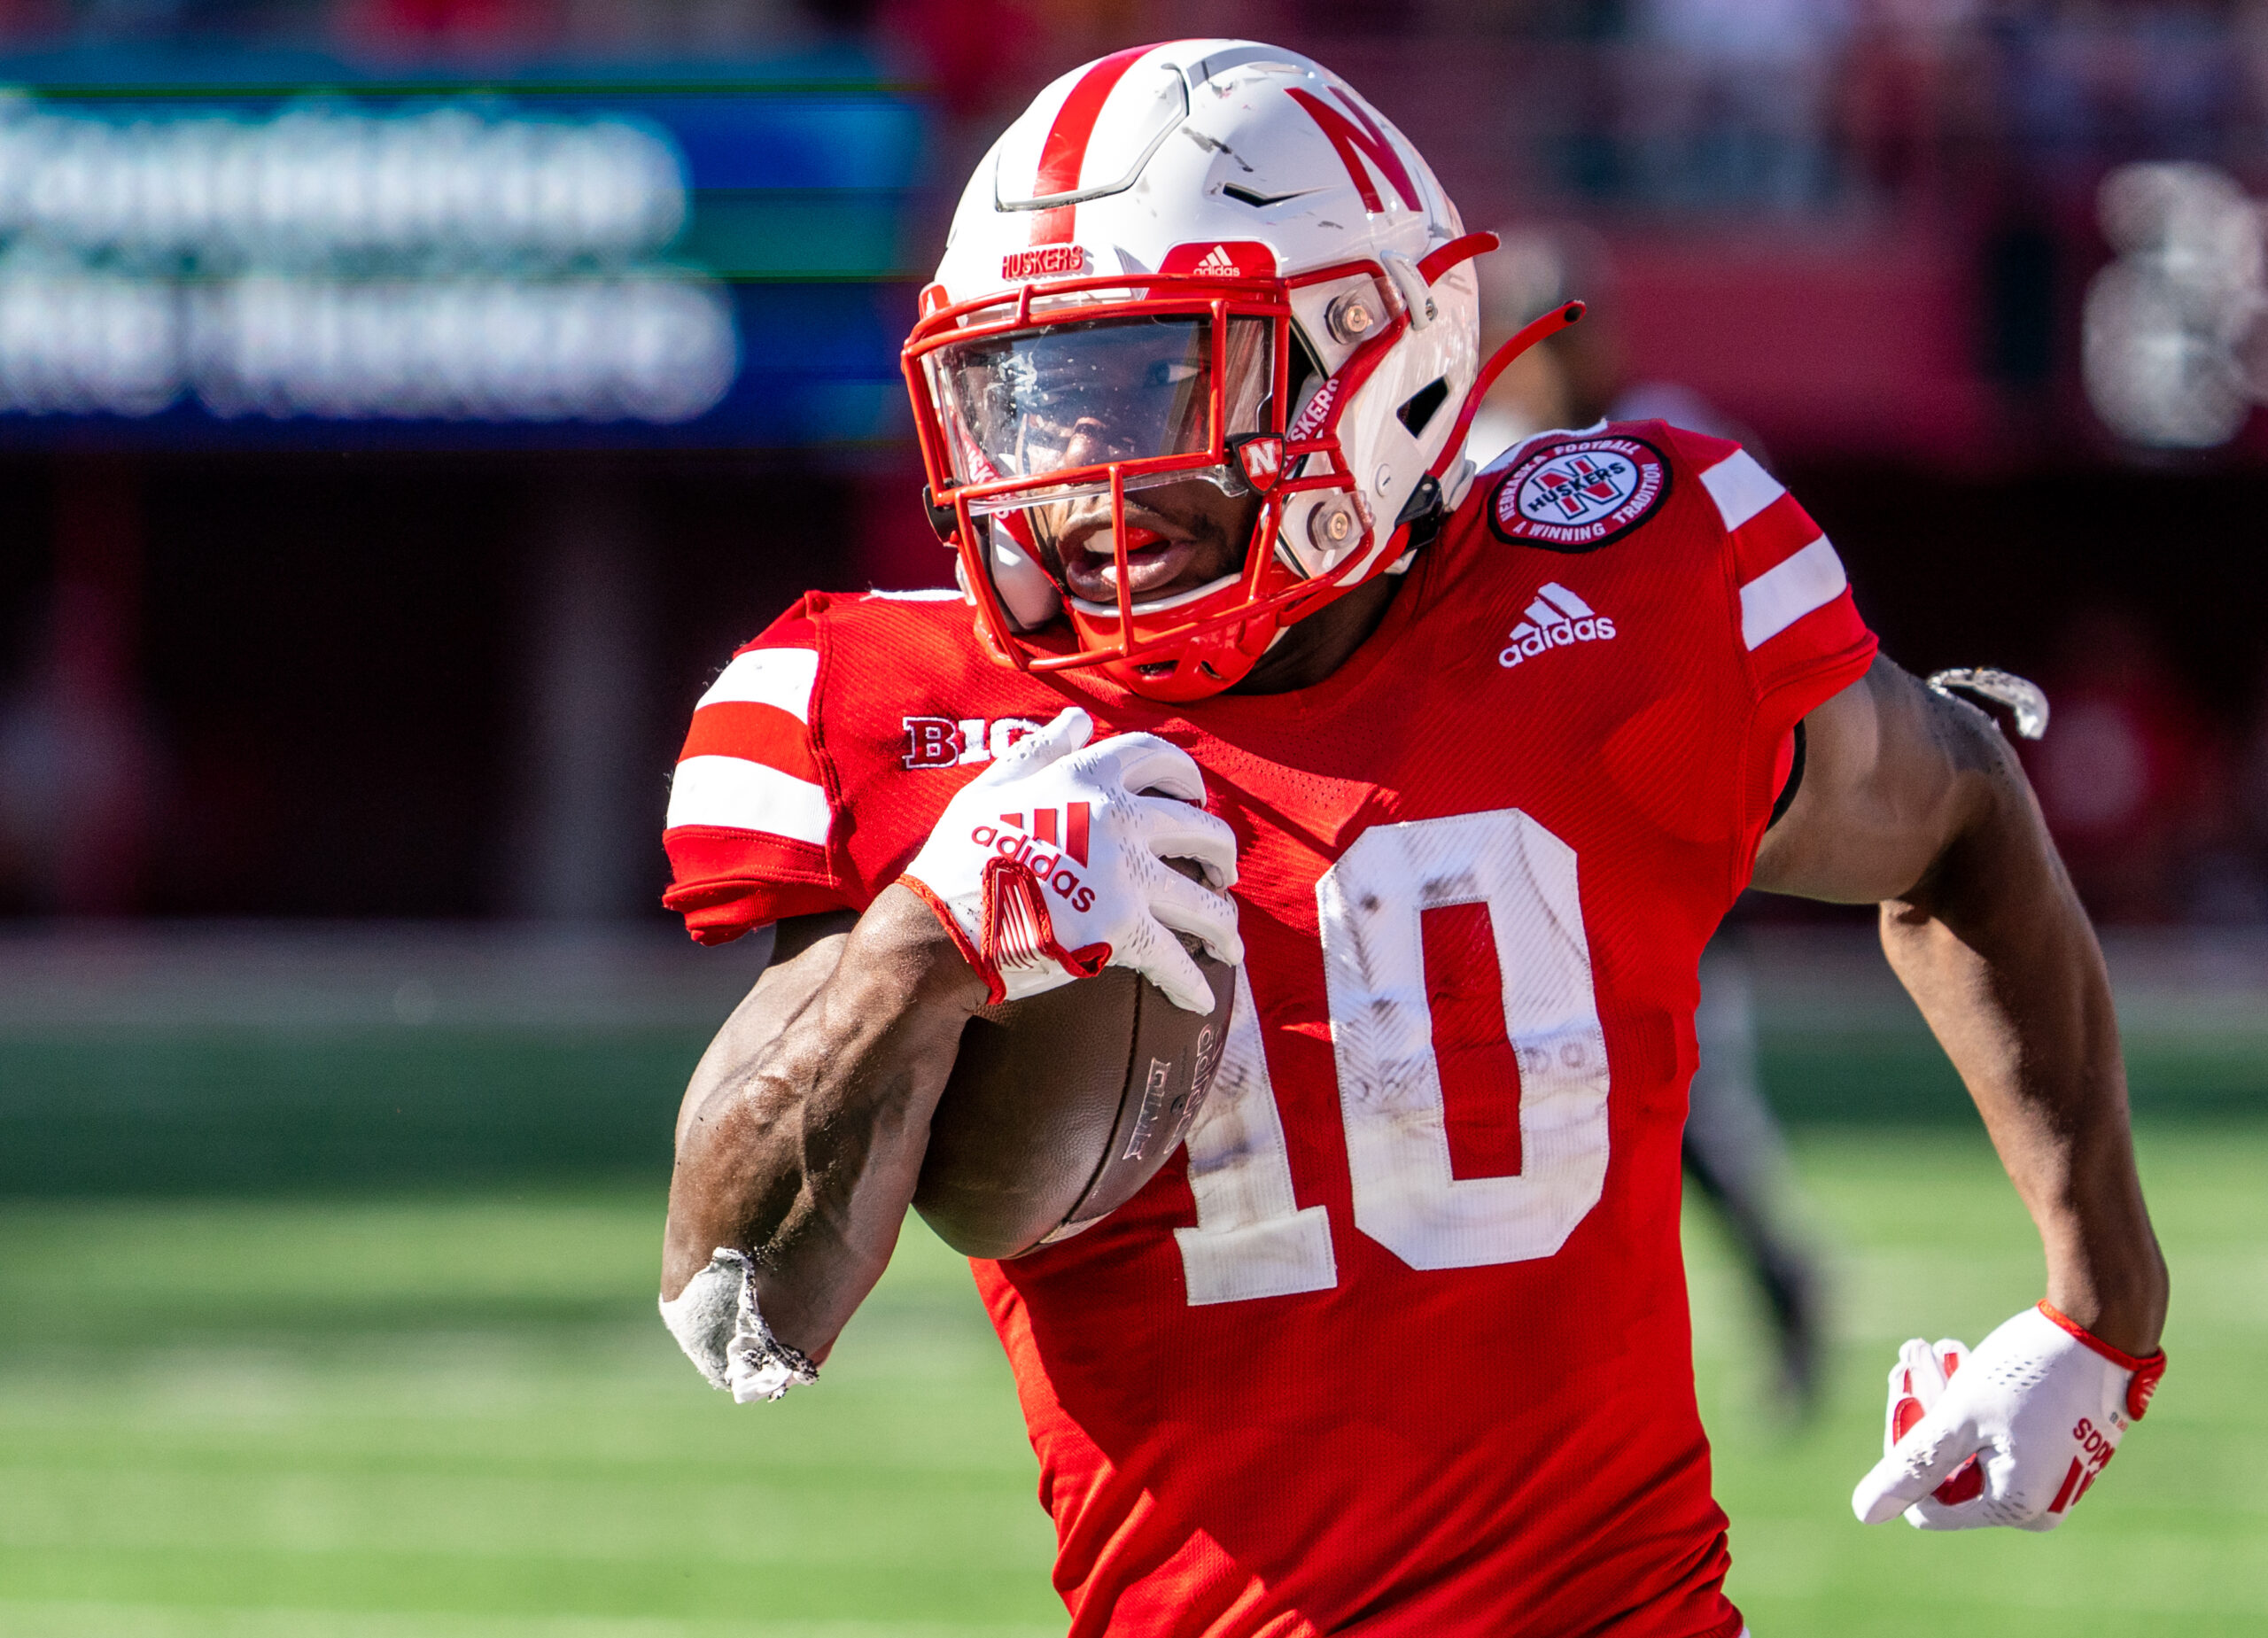 Nebraska’s ground game sparks first victory of the season